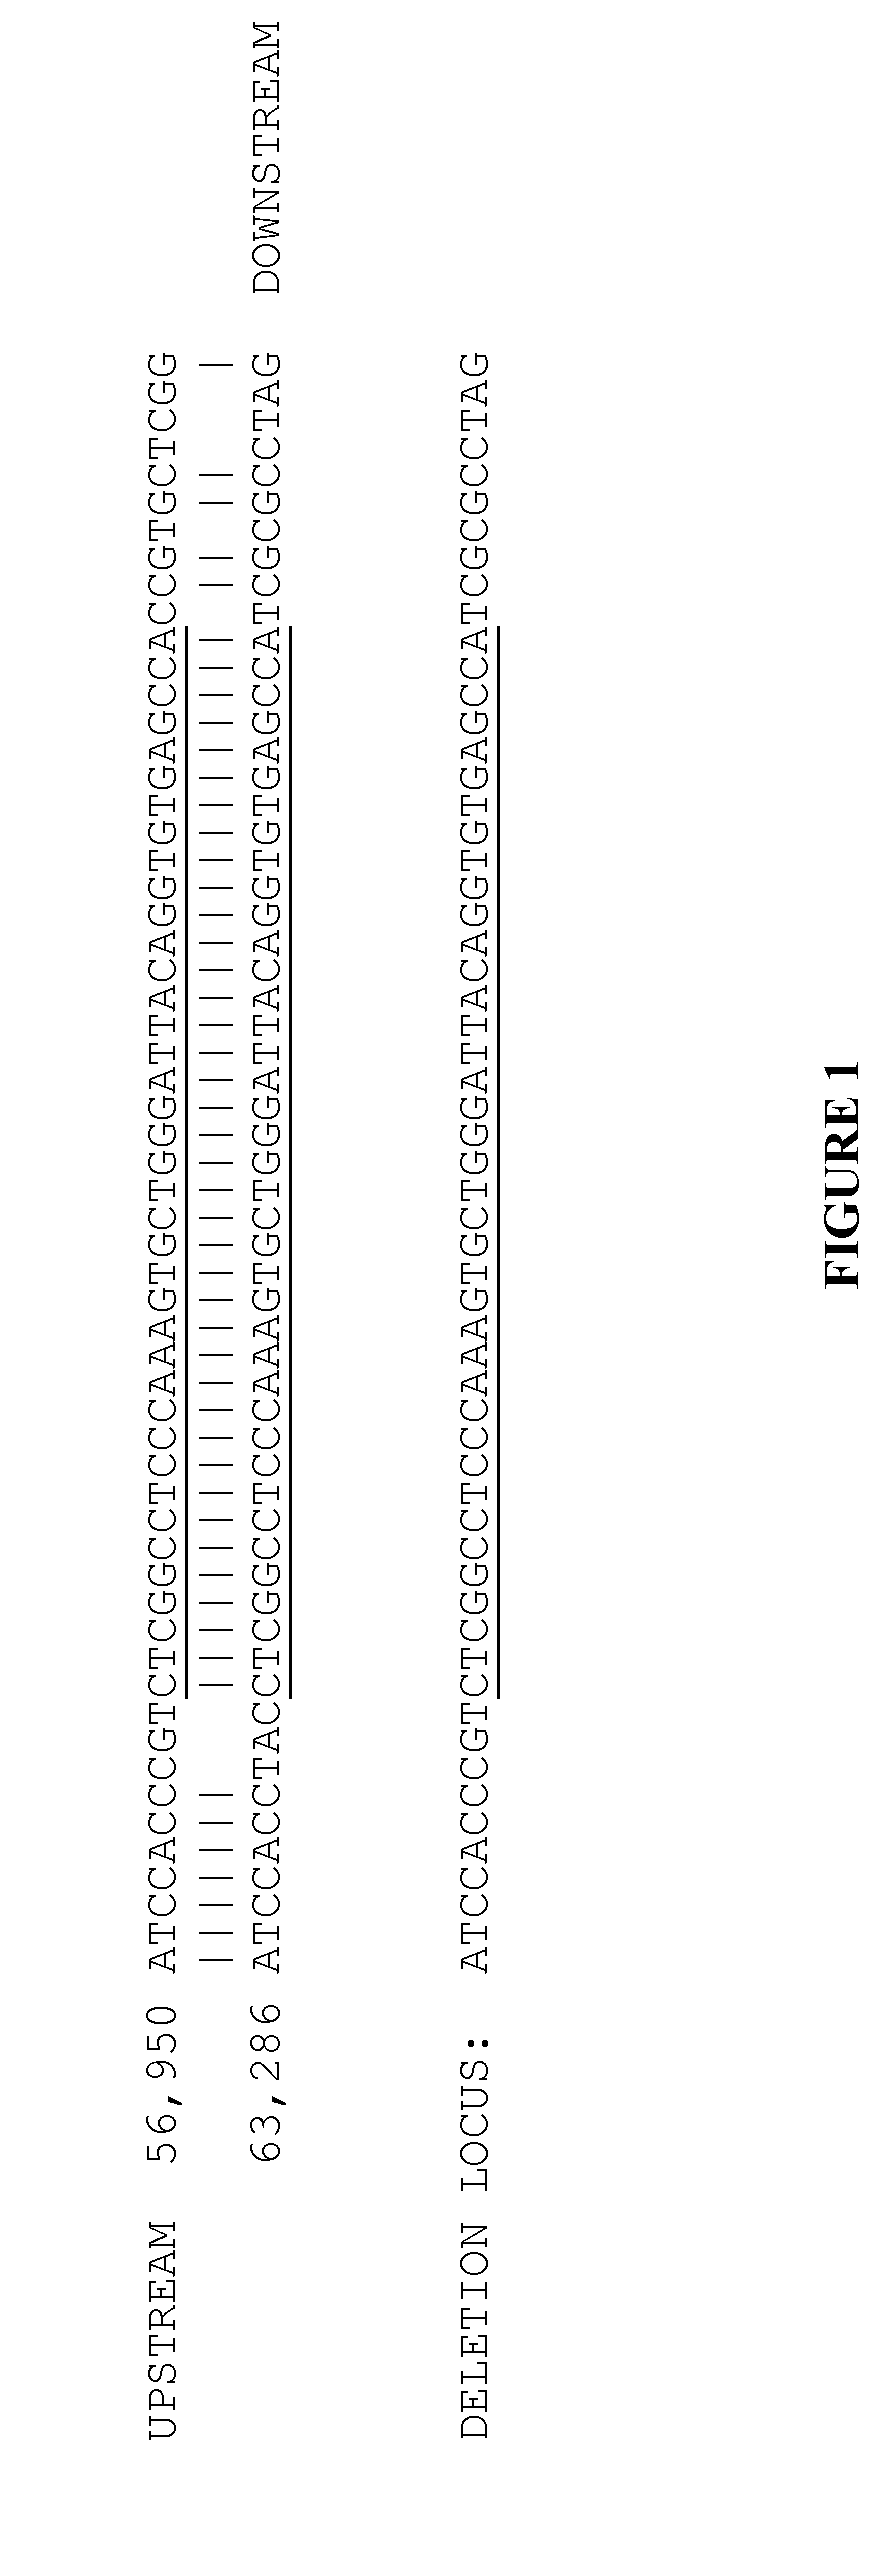 Large deletions in human brca1 gene and use thereof